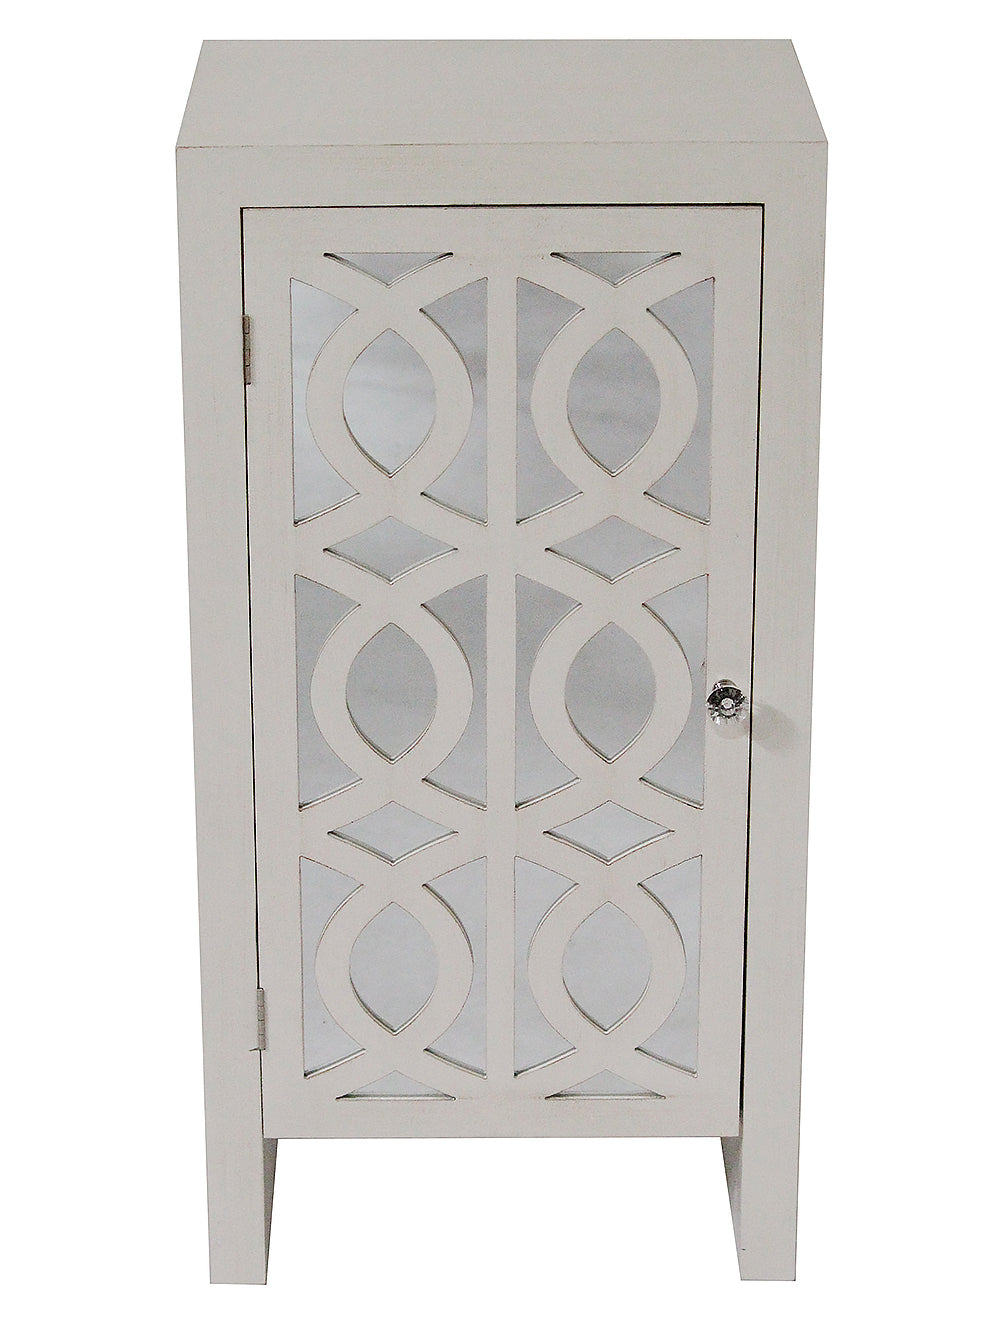 36" Antique White Wood Accent Cabinet with Mirrored Glass Door